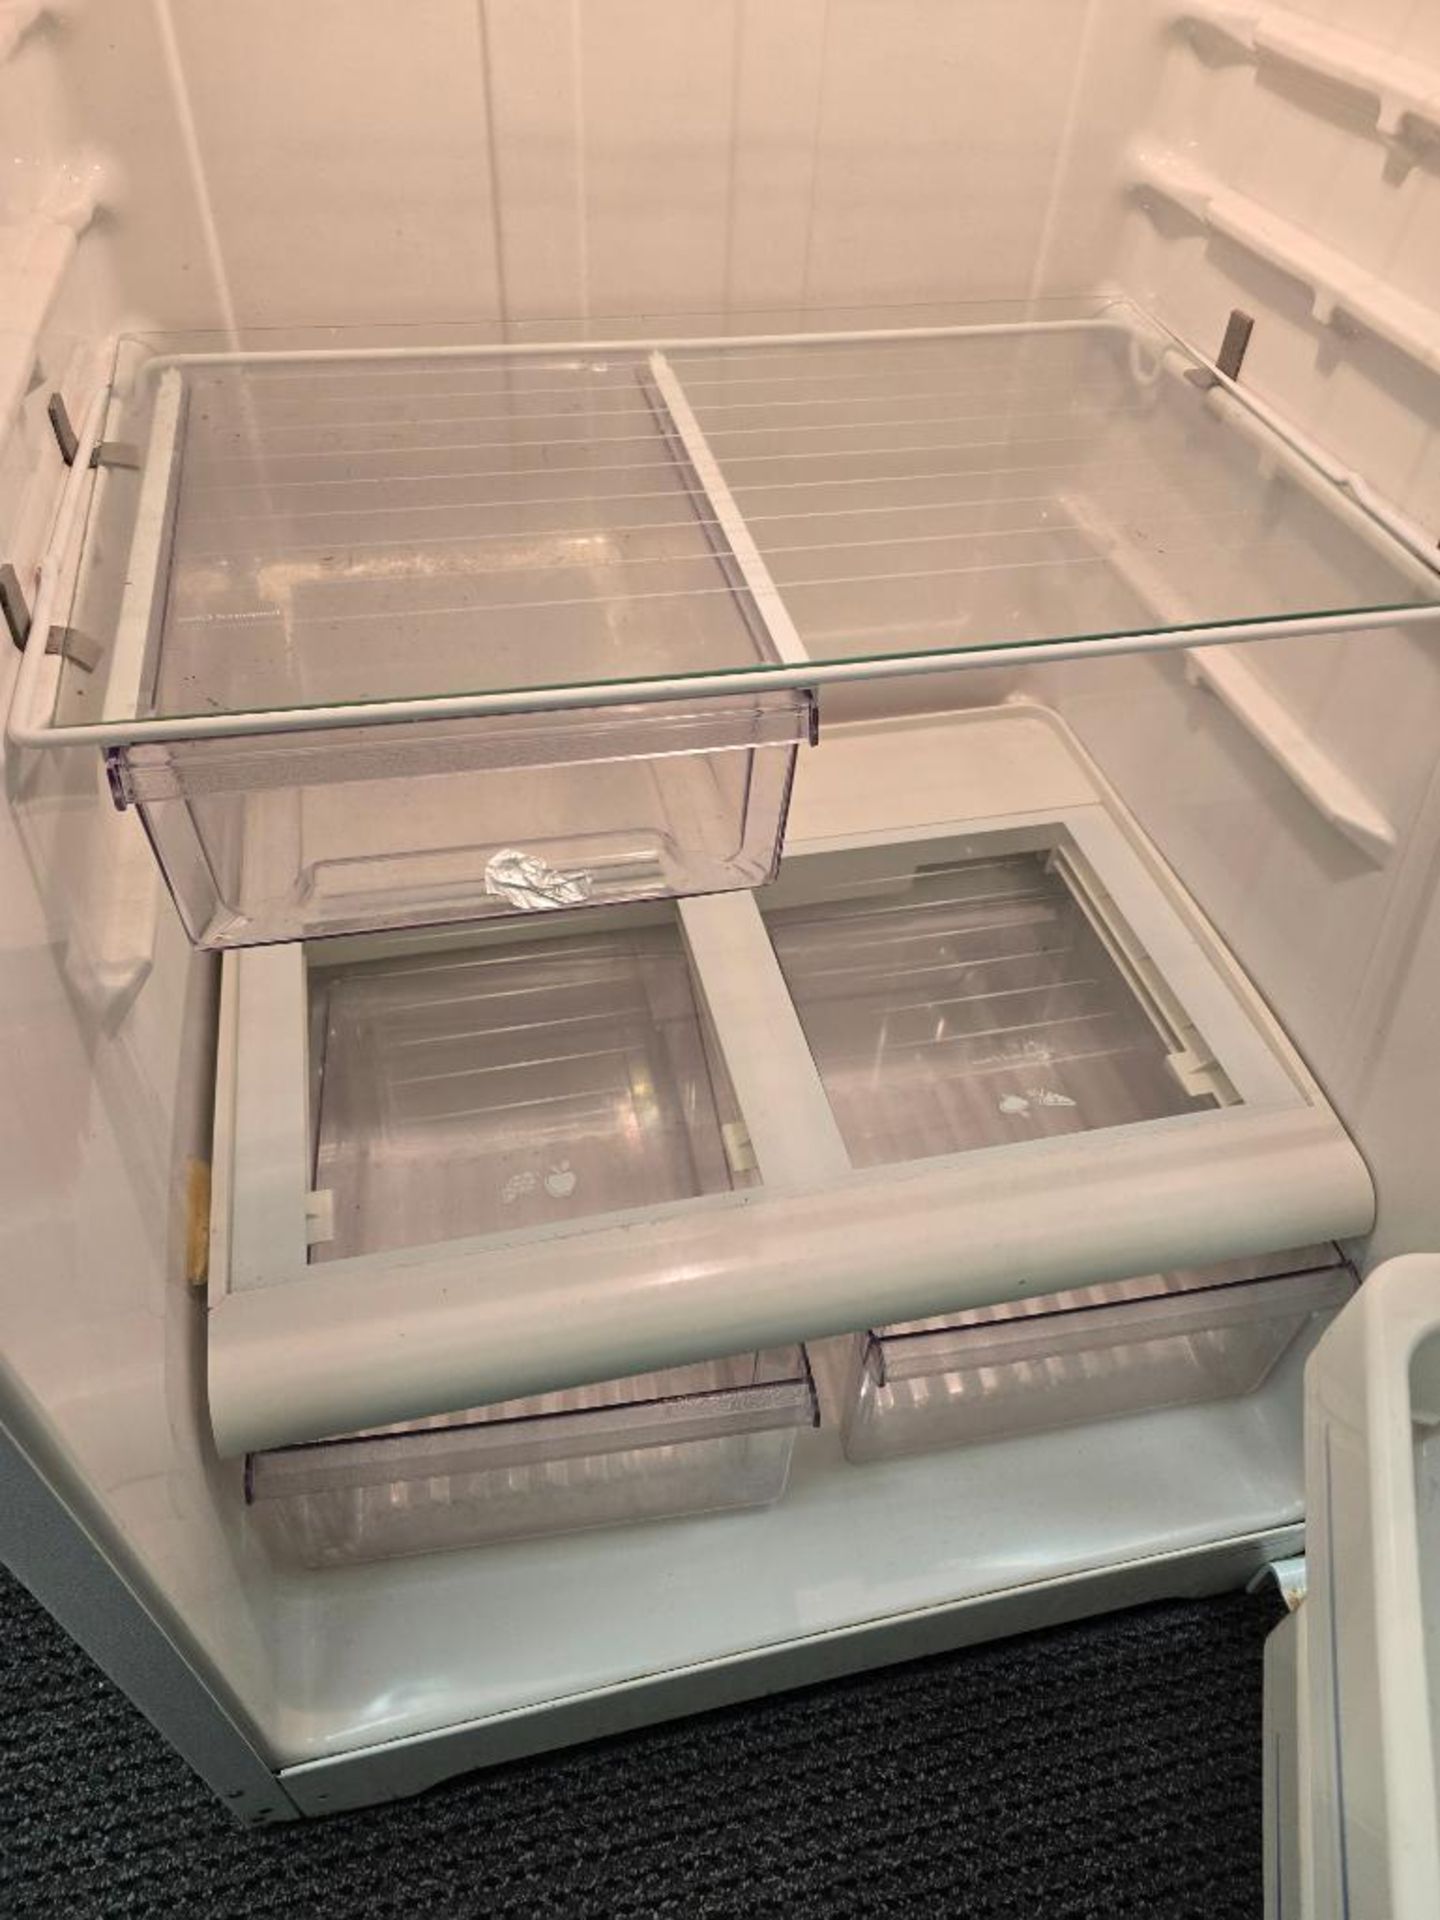 GE Household Refrigerator/Freezer ($20 Loading Fee Will Be Added To Buyer's Invoice) - Image 6 of 6